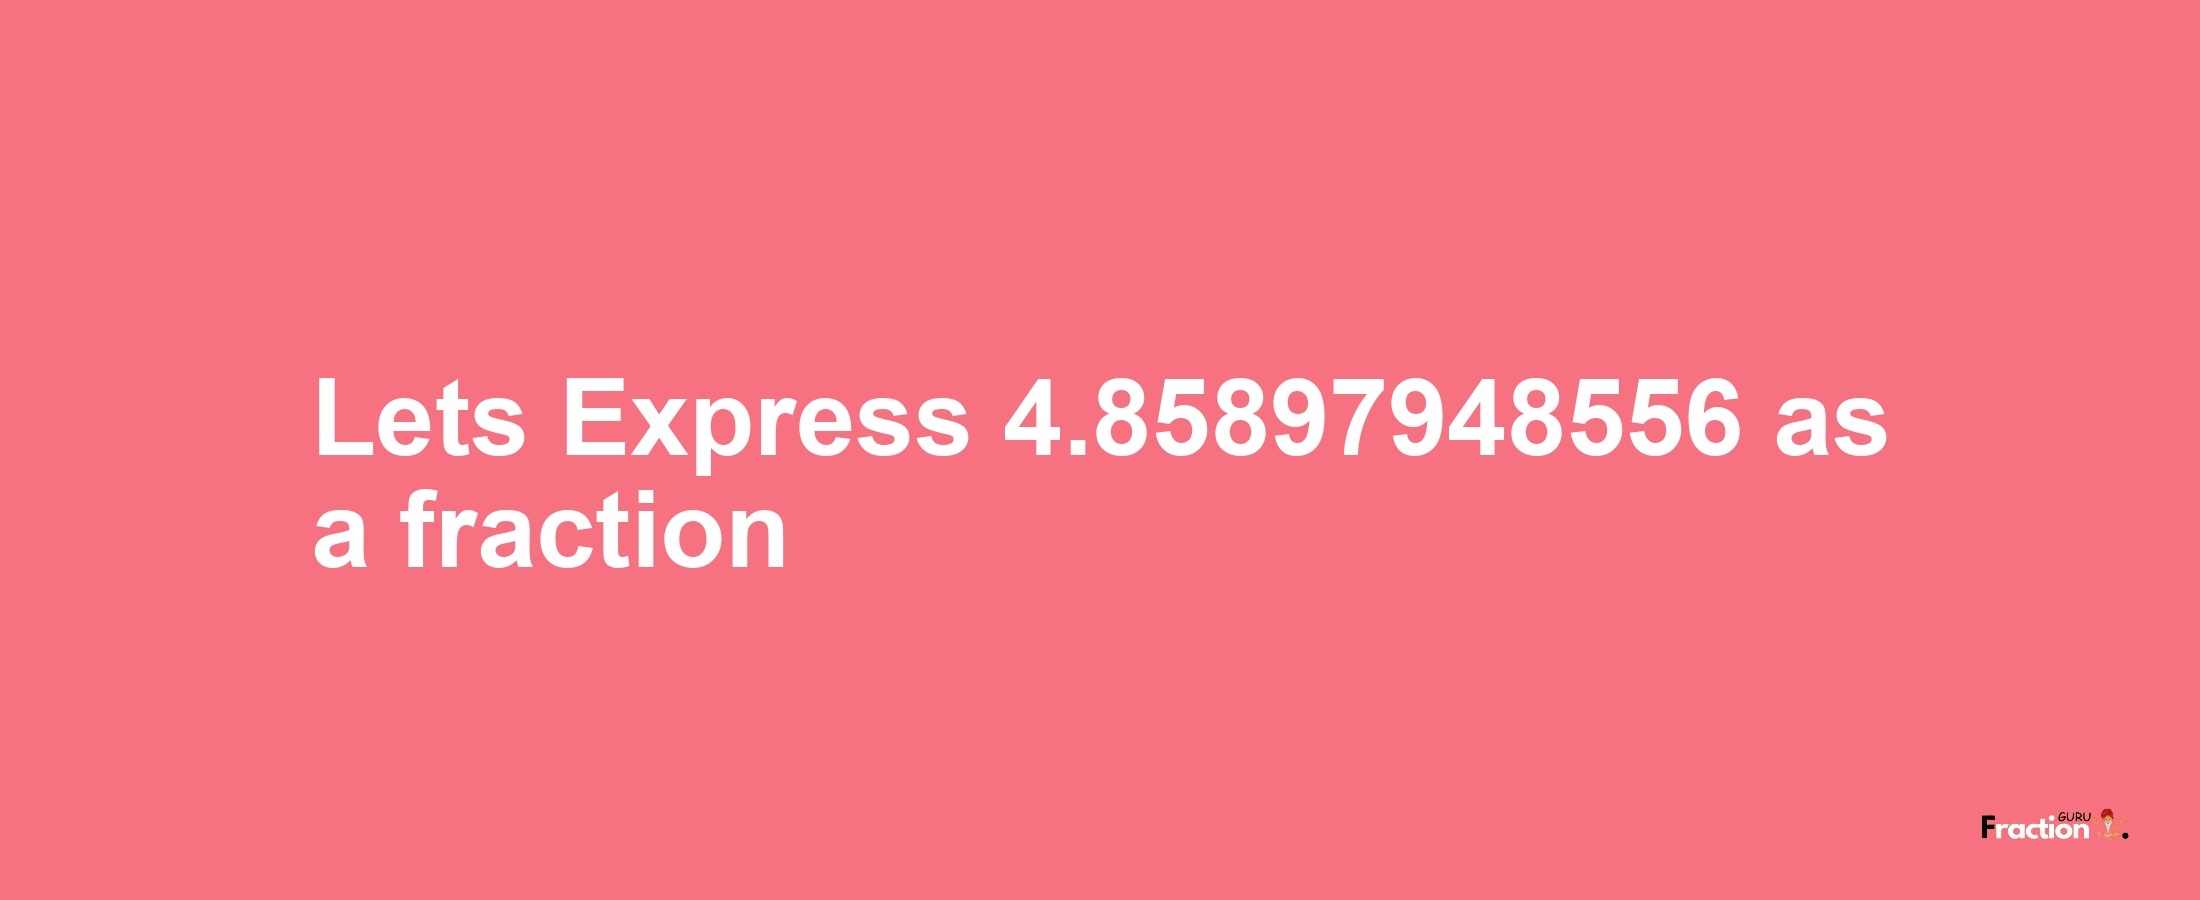 Lets Express 4.85897948556 as afraction